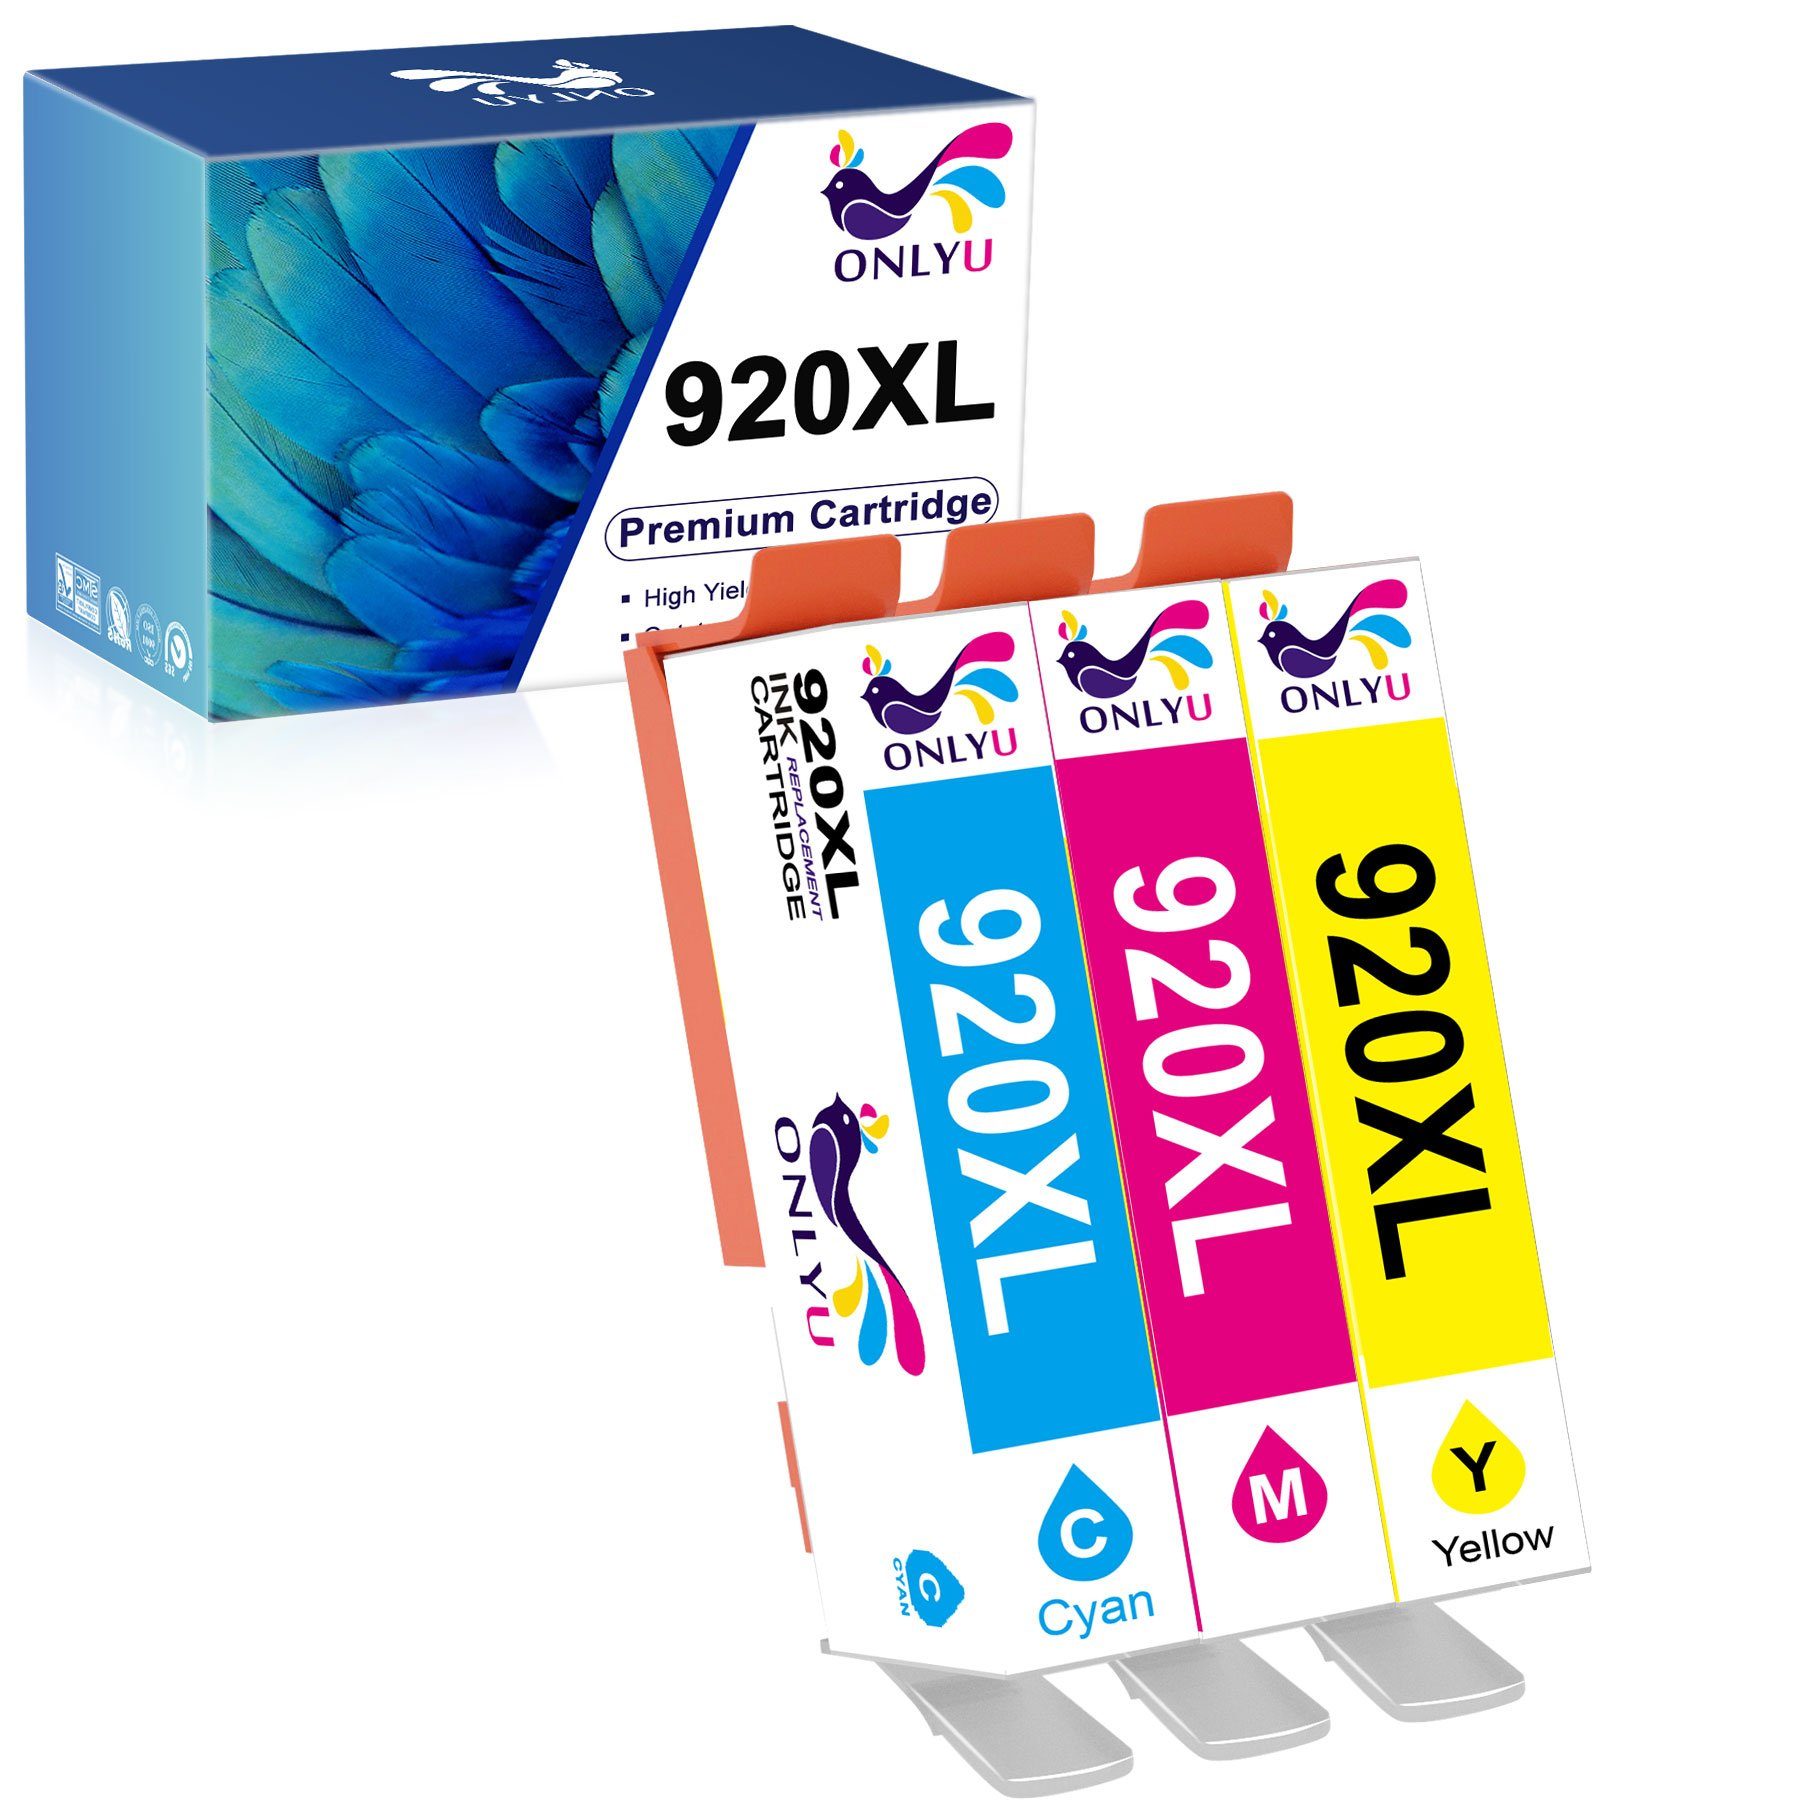 912XL 912 Ink Cartridges Compatible for Hp 912XL 912 Ink Cartridge High  Yield for HP OfficeJet 6950 6960 6961 6963 6964 6965 6966 6968 6970 6971